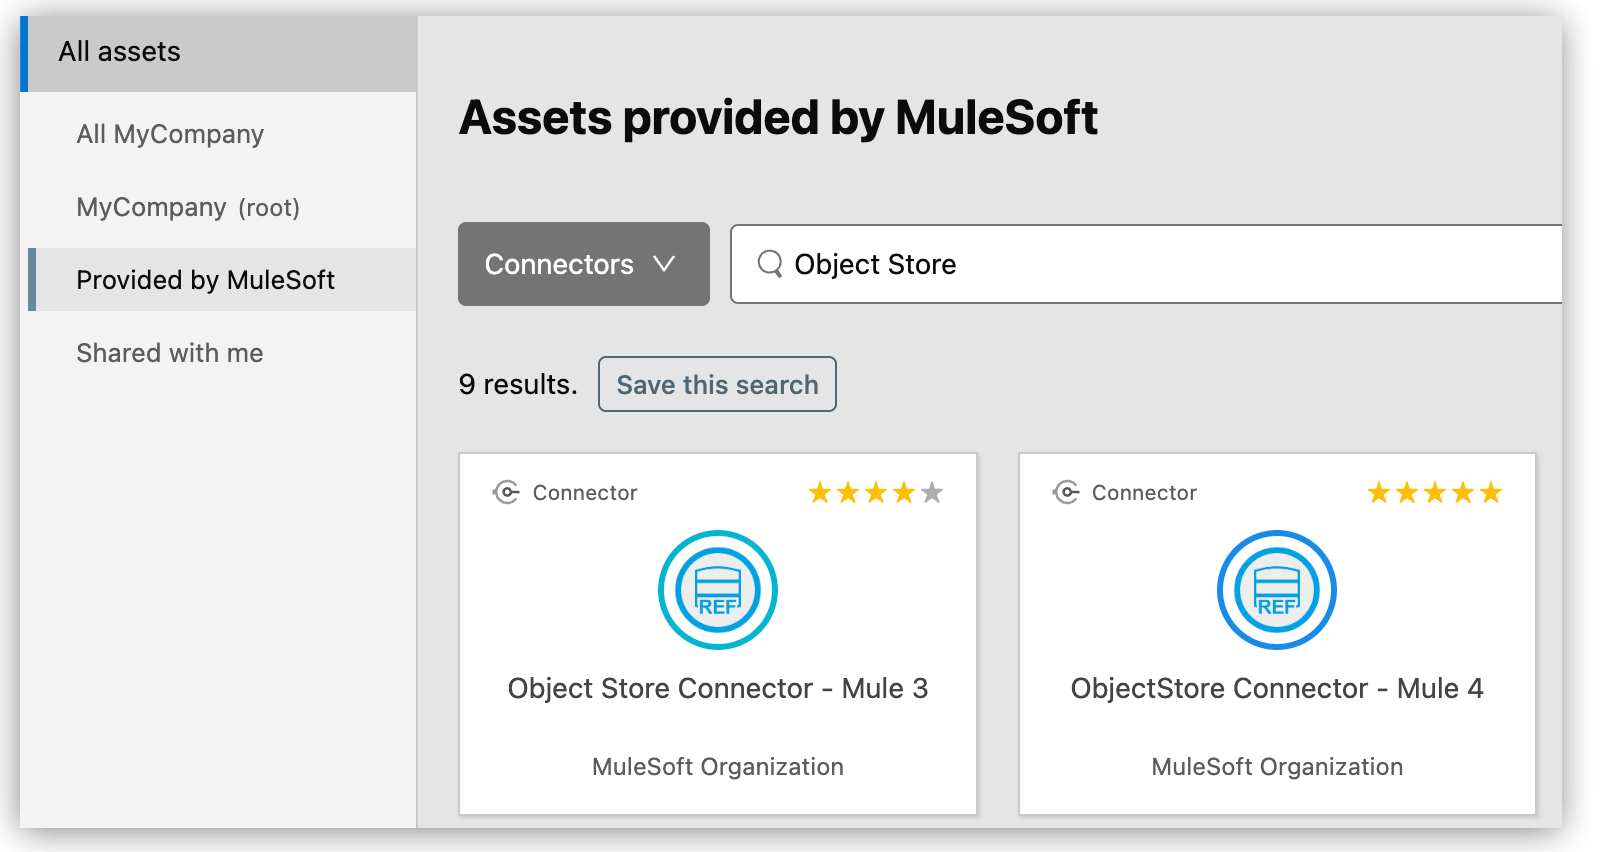 Provided by MuleSoft option and search field in Exchange